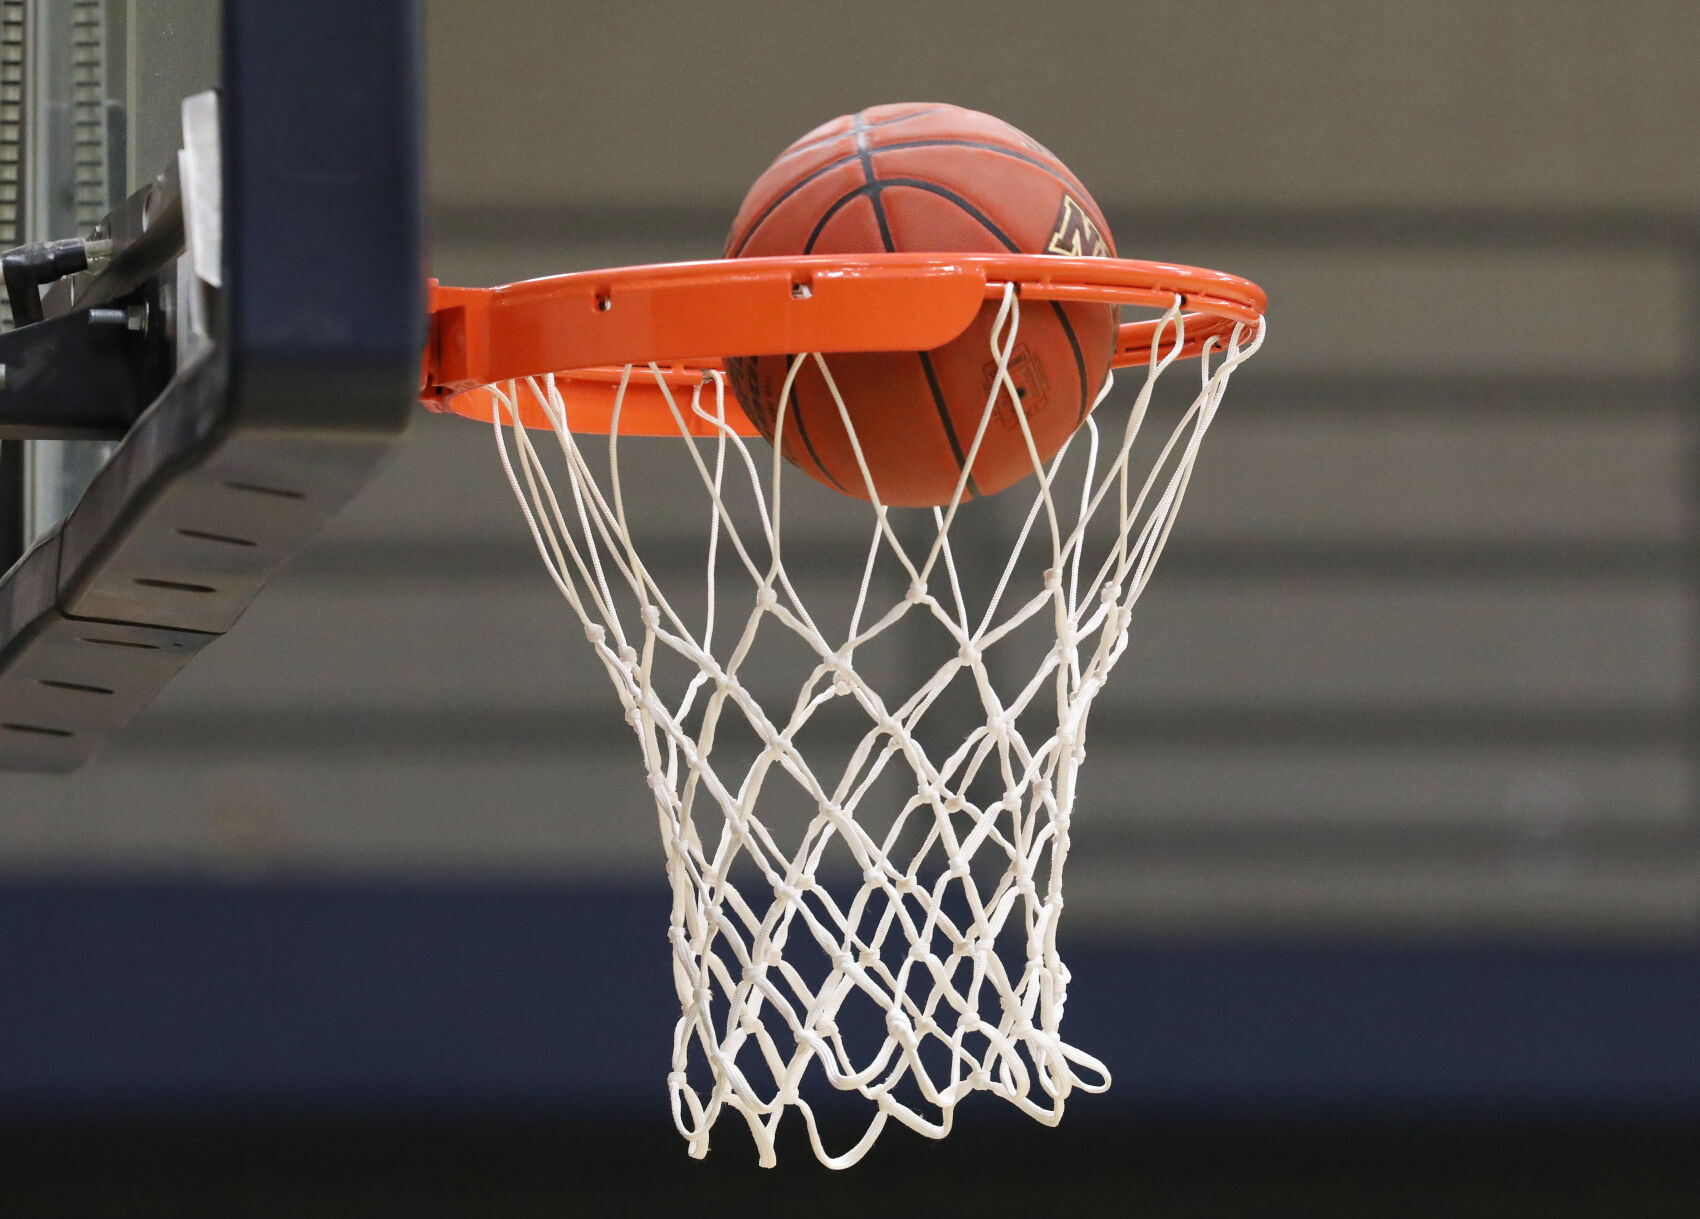 Latest High School Sports Standings and Polls: Basketball, Wrestling, and Bowling